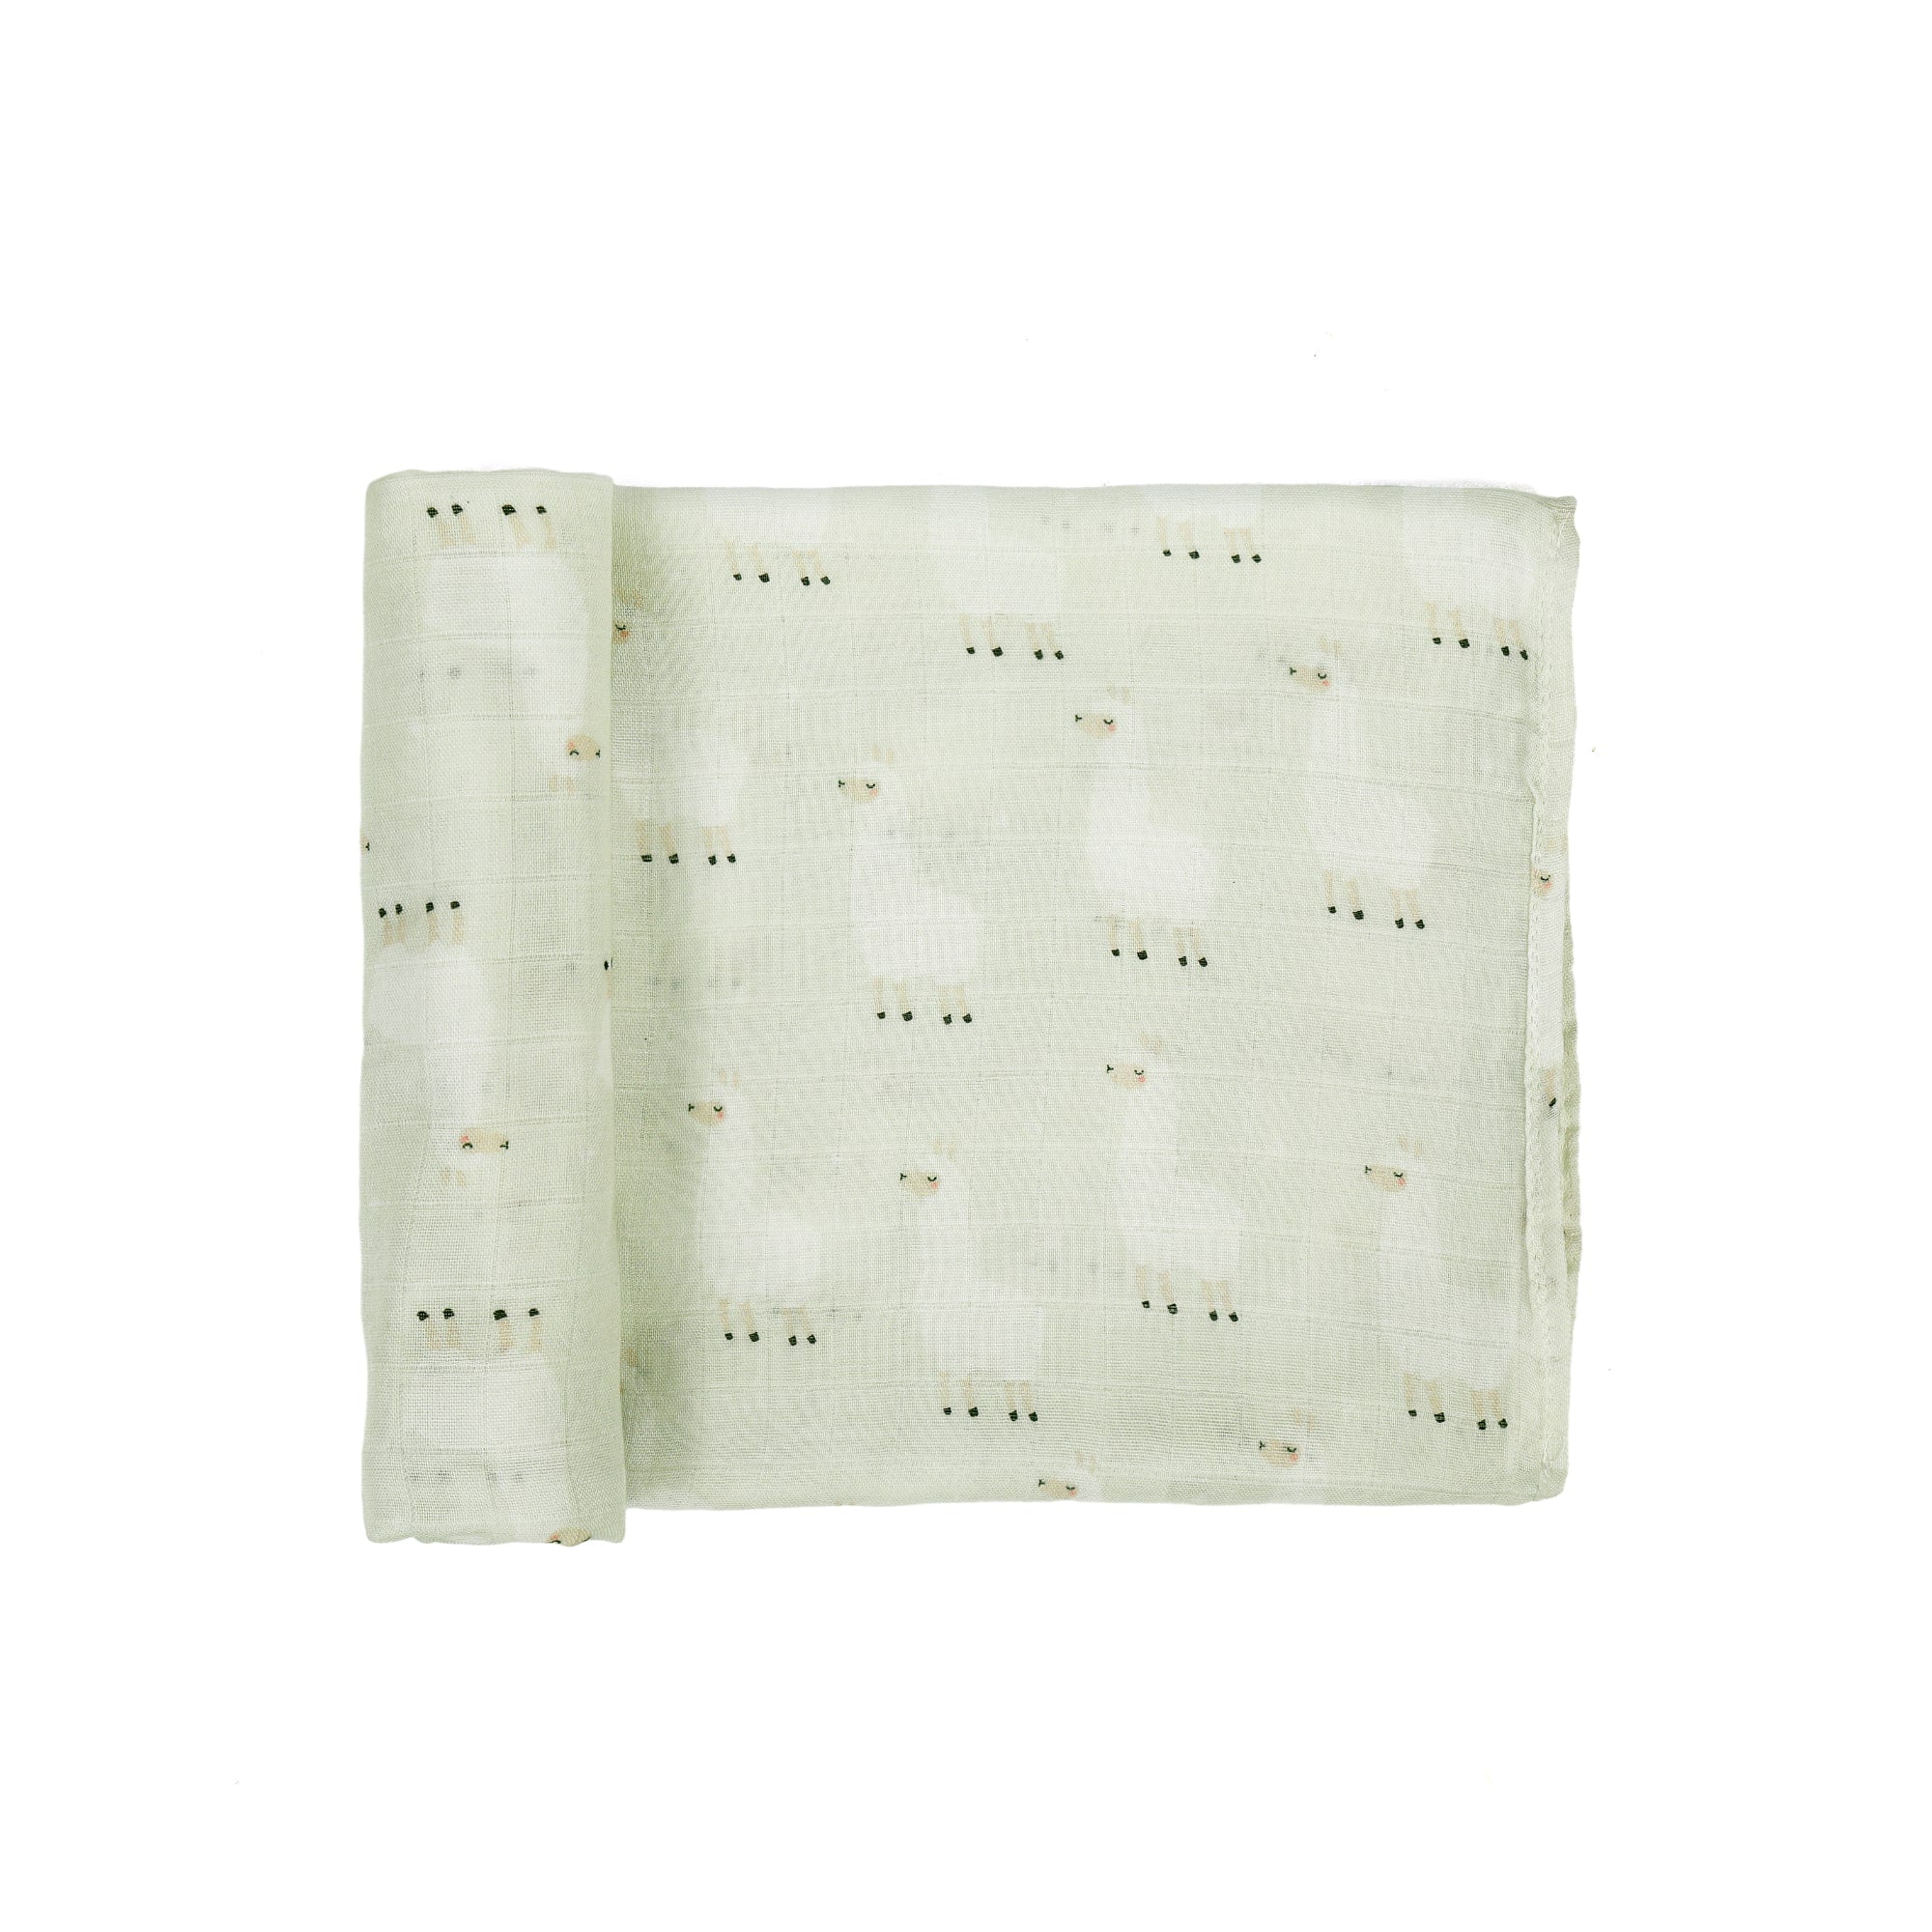 Little Llama Swaddle - Baby Swaddles & Wraps at Louie Meets Lola